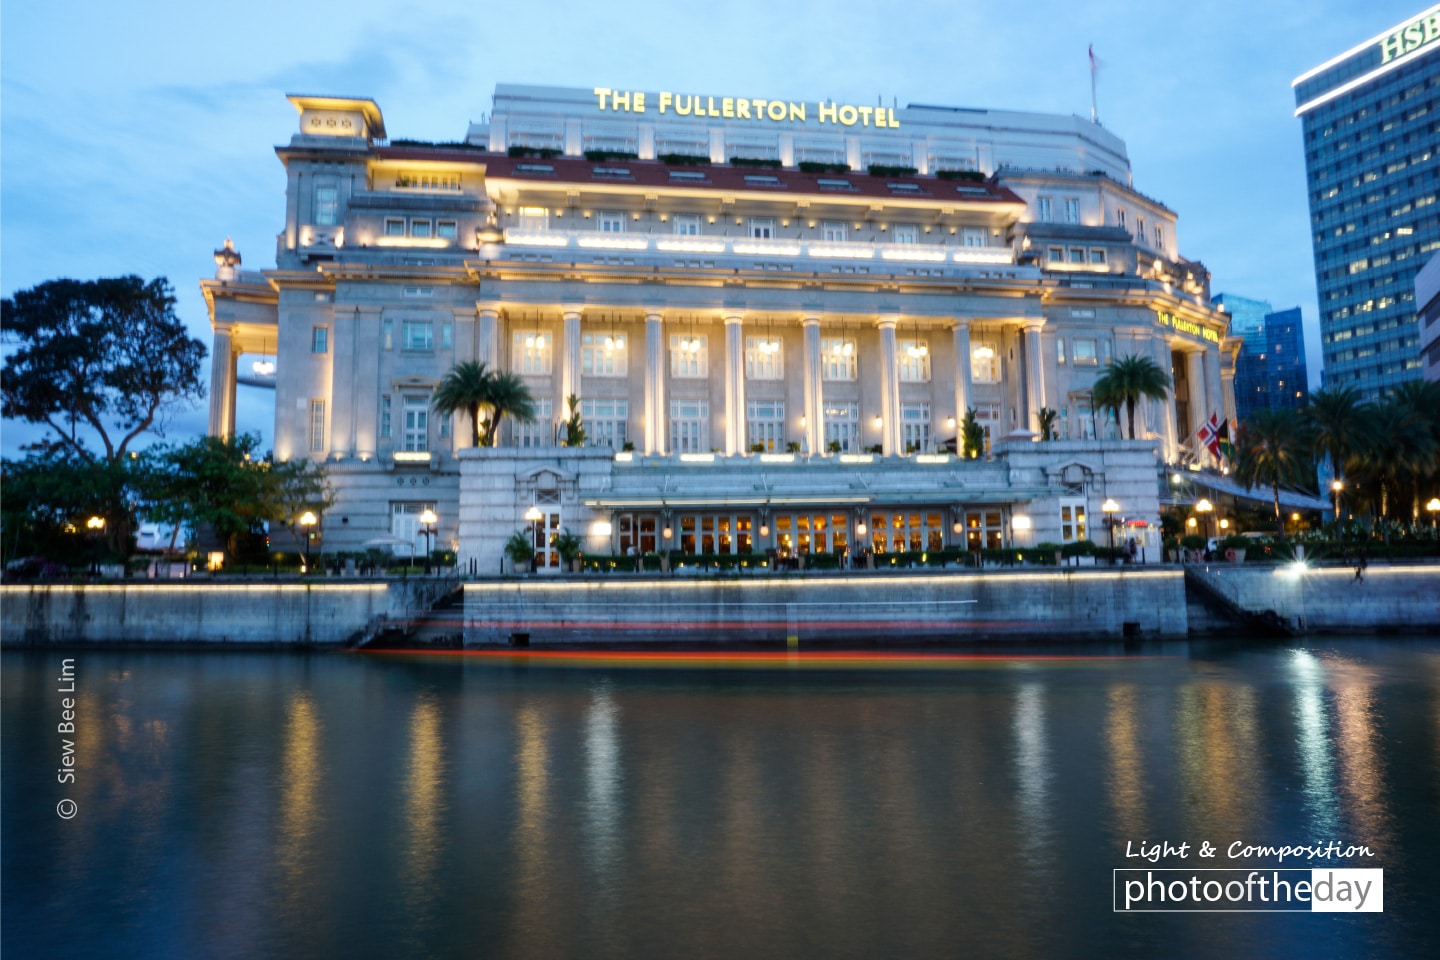 The Building of the Fullerton Hotel, by Siew Bee Lim